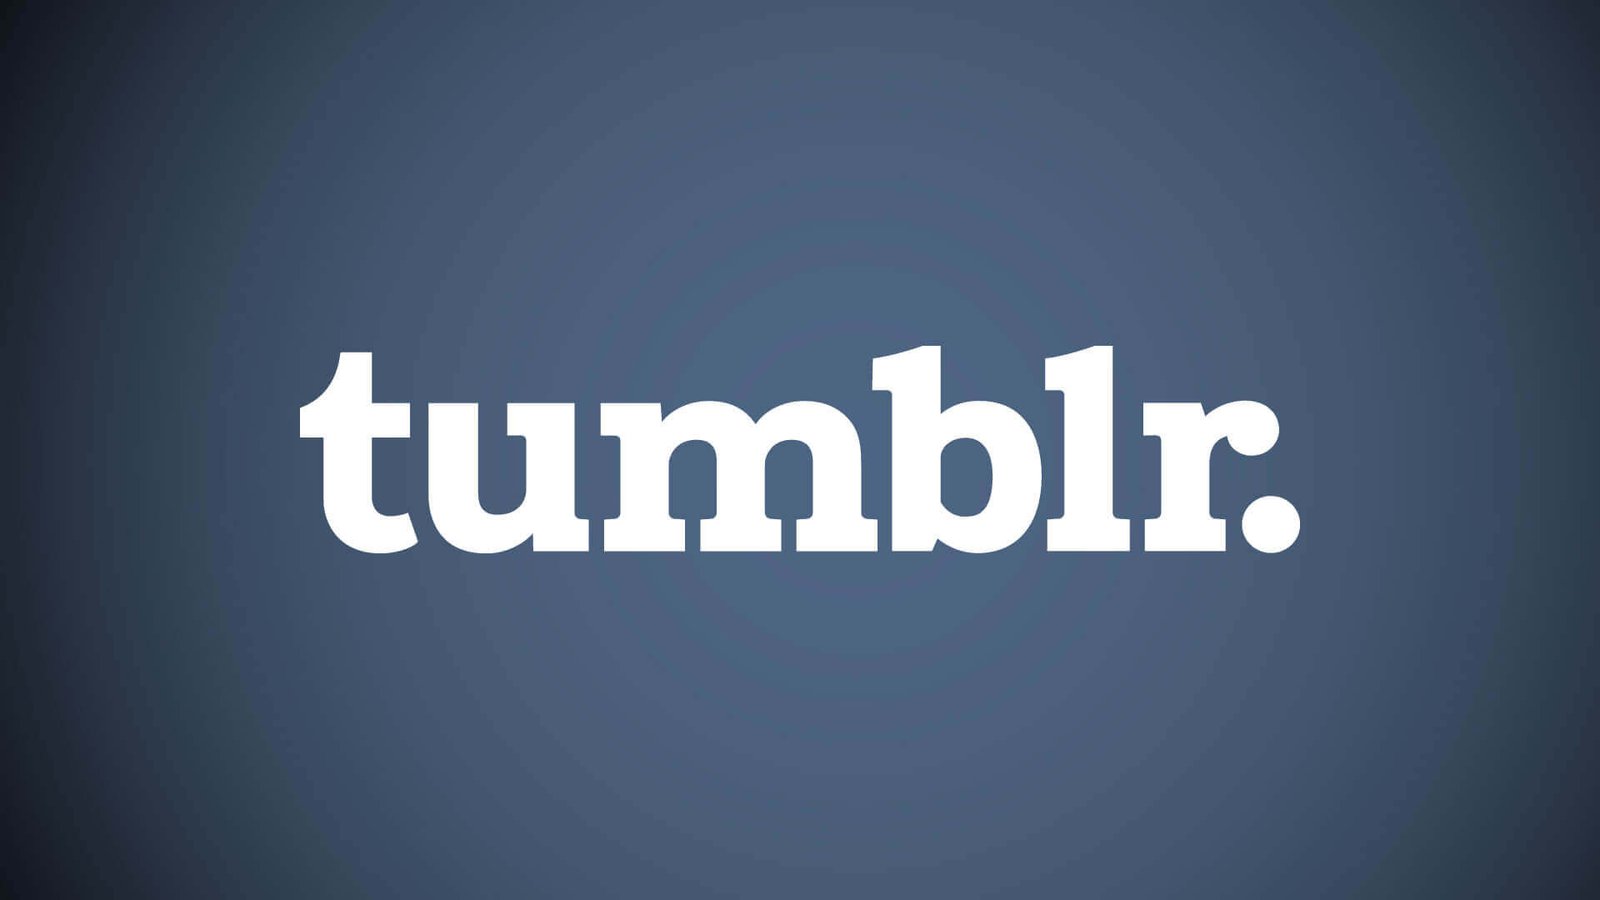 Tumblr is an all-in-one social app